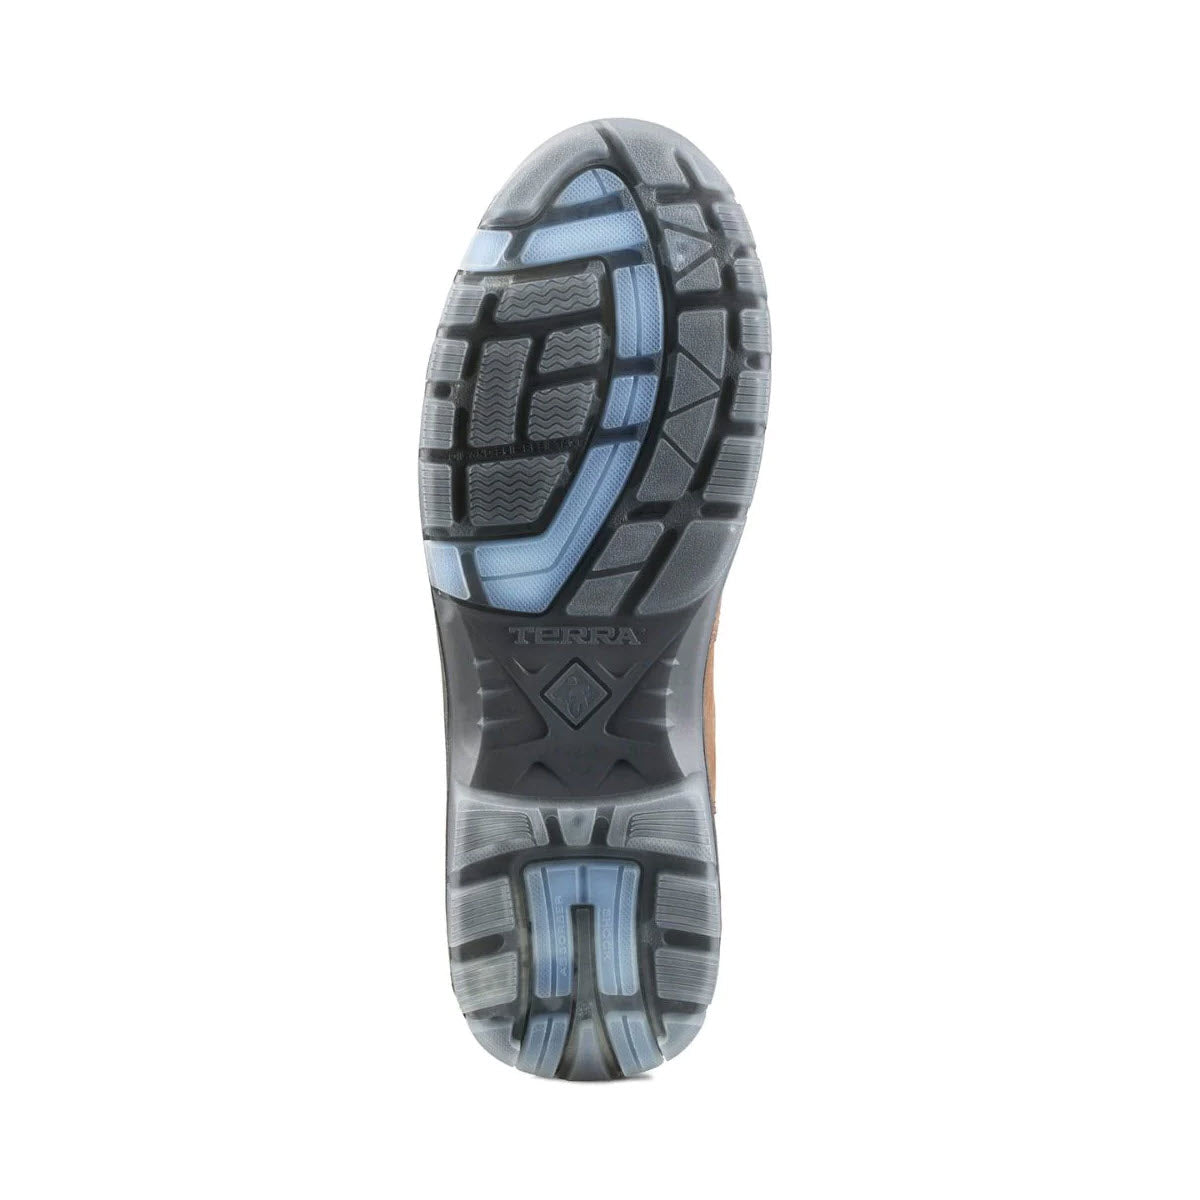 Bottom view of a gray and blue Terra waterproof leather hiking shoe sole showing detailed tread patterns and brand logo &quot;tetura.